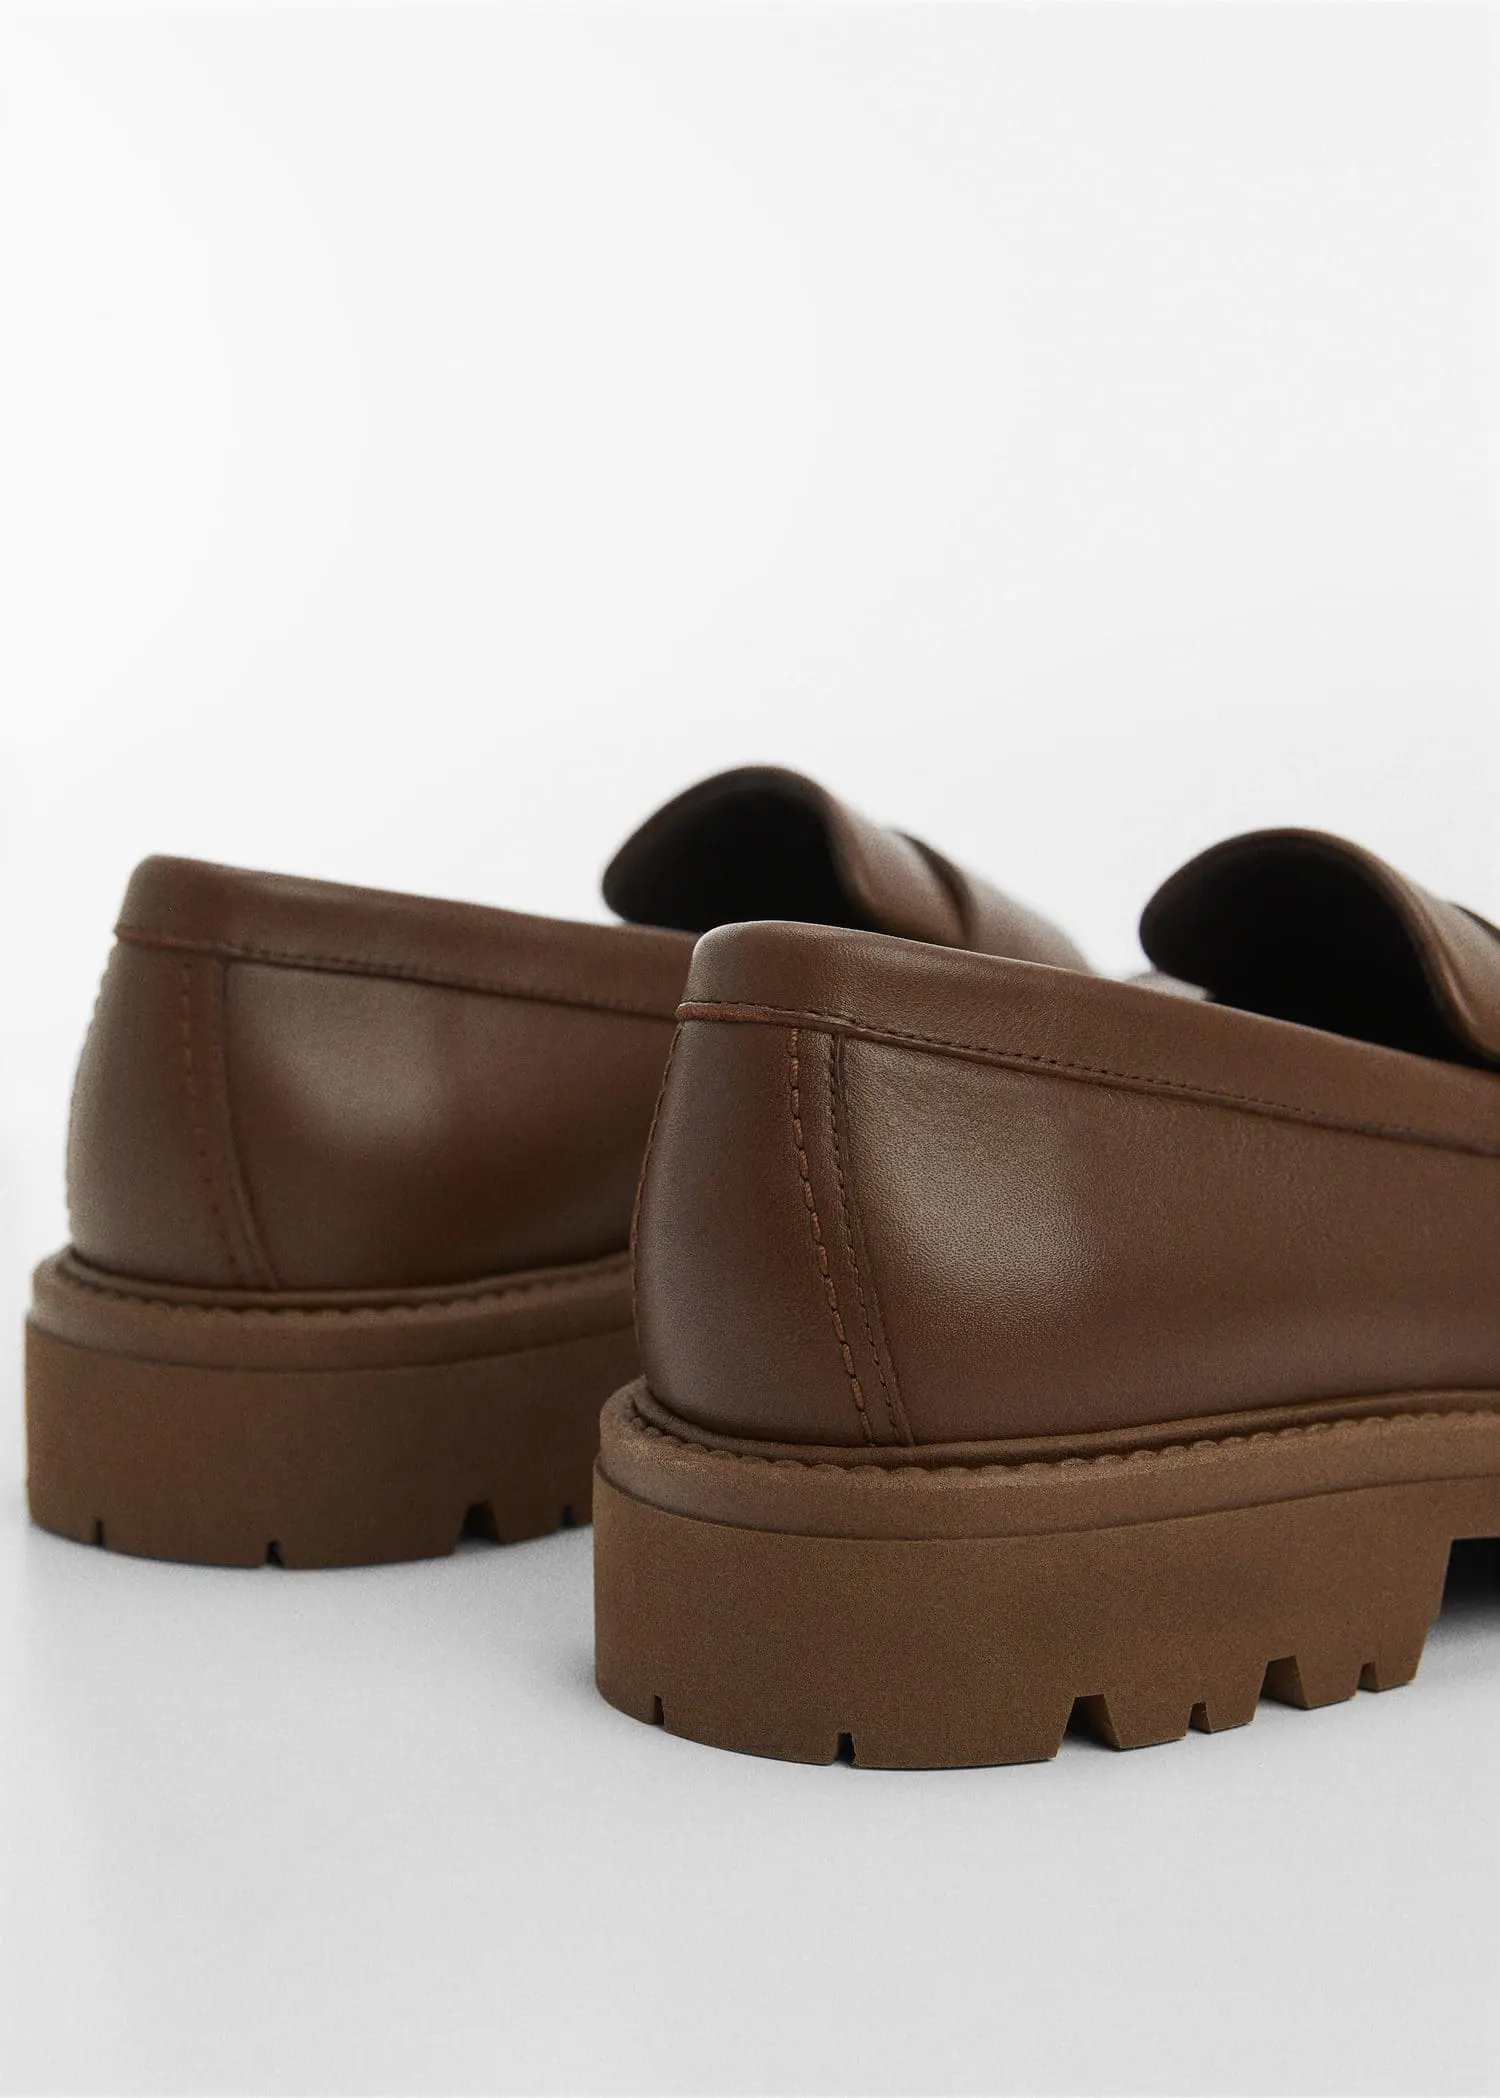 Mango Leather moccasin with track sole. 3